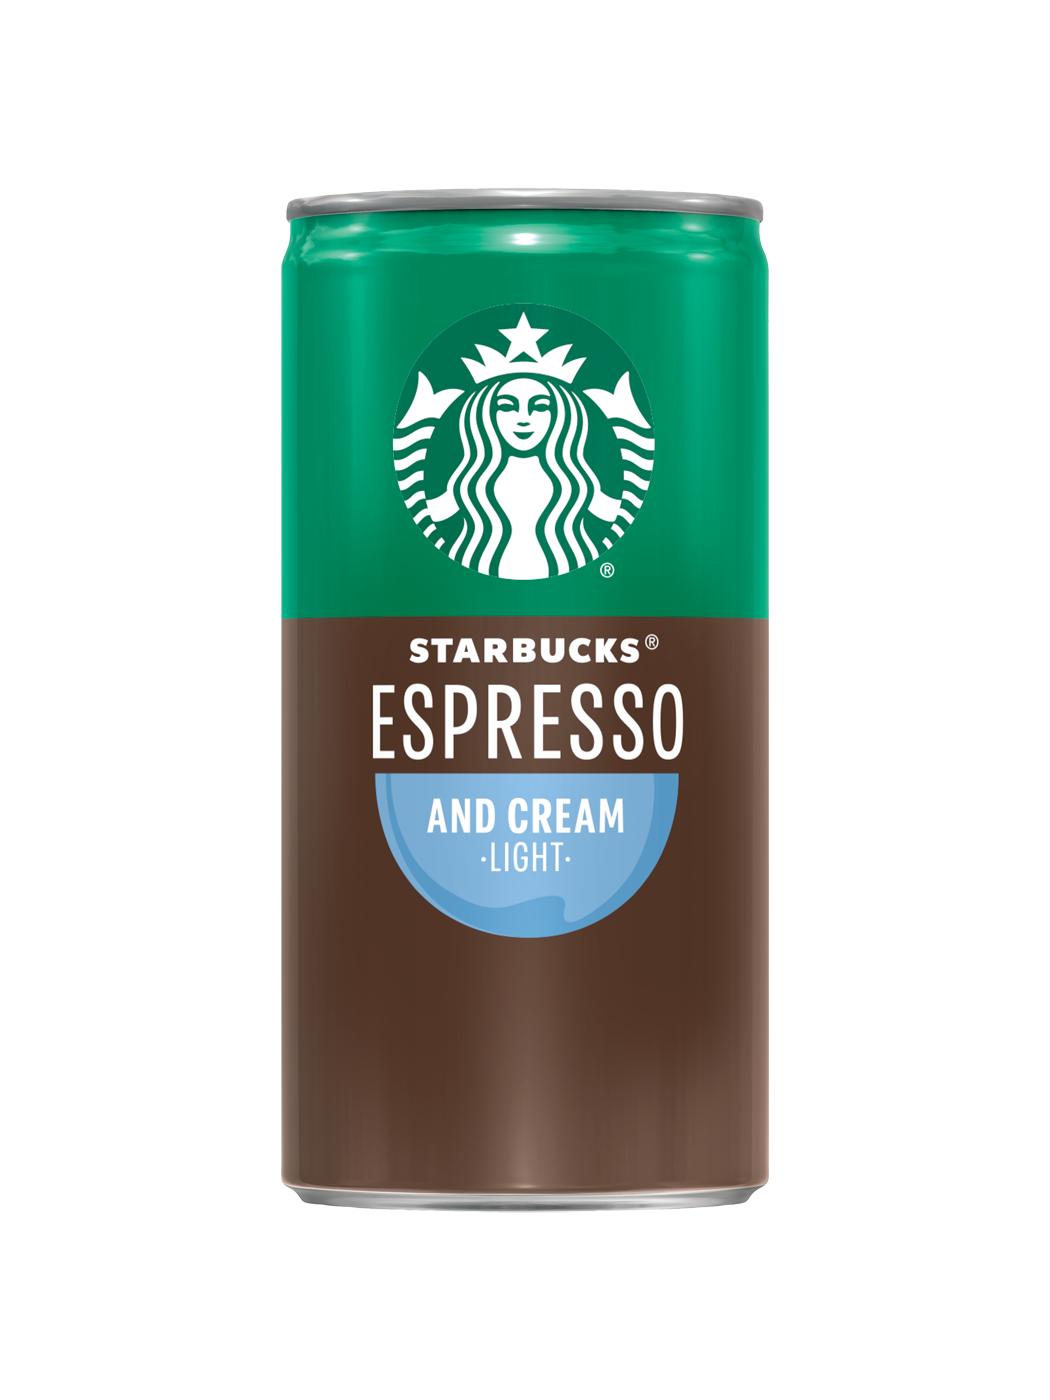 Starbucks Espresso and Cream Light Drink 6.5 oz Cans; image 2 of 2